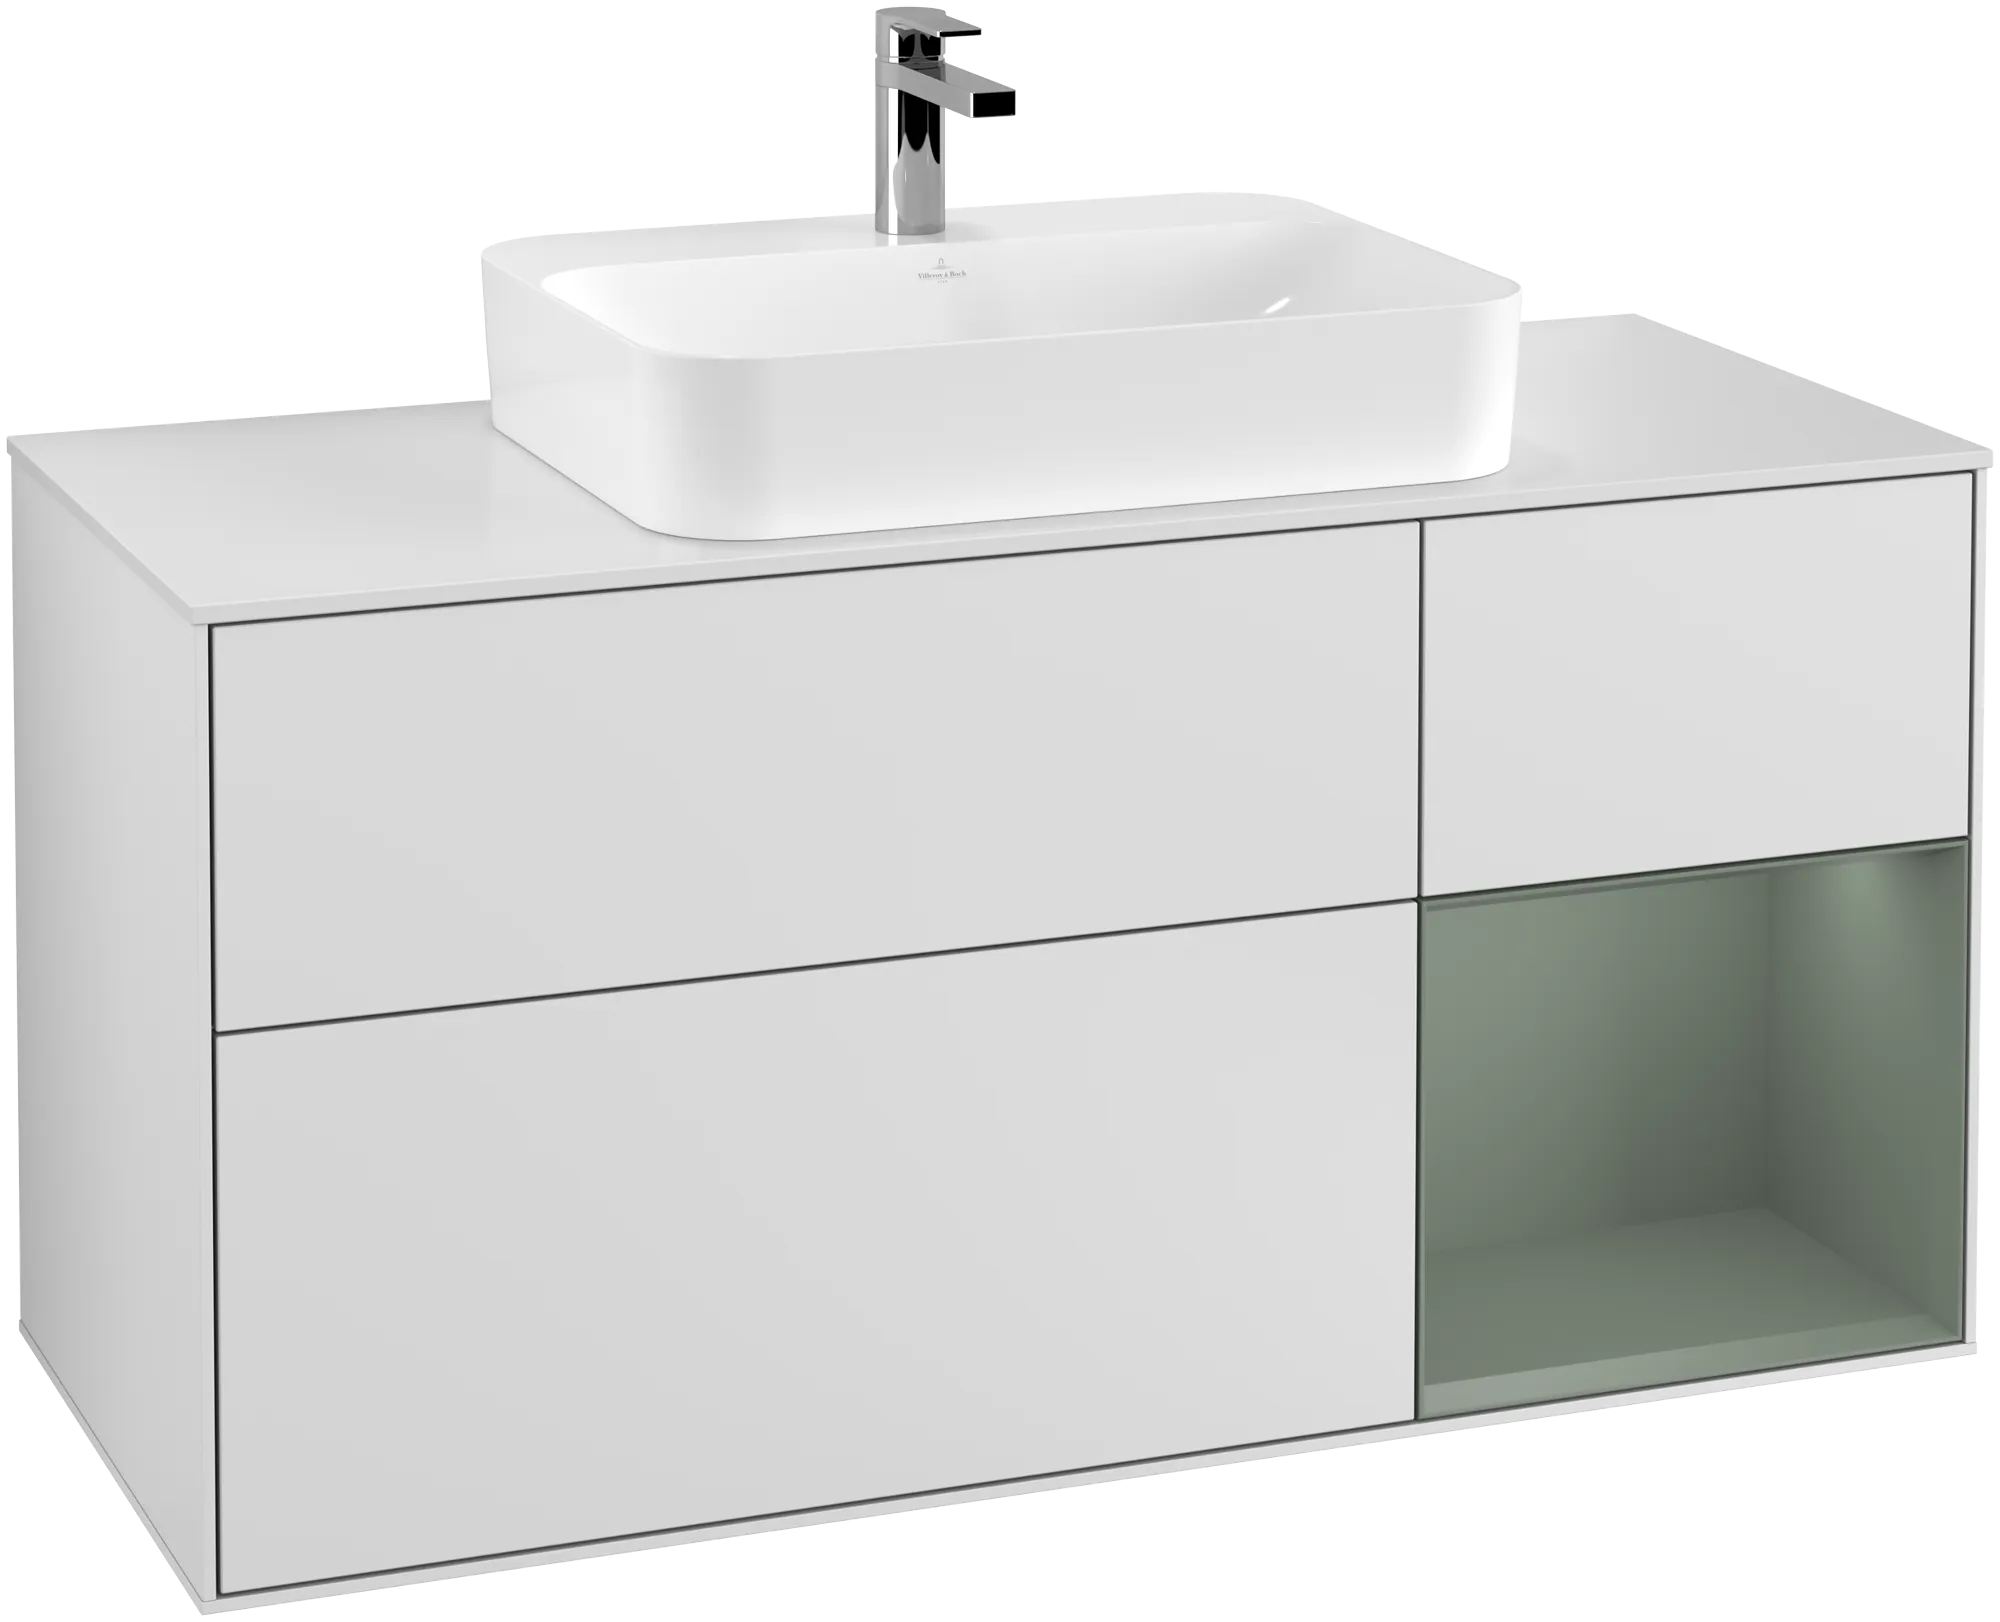 Obrázek VILLEROY BOCH Finion Vanity unit, with lighting, 3 pull-out compartments, 1200 x 603 x 501 mm, White Matt Lacquer / Olive Matt Lacquer / Glass White Matt #G421GMMT